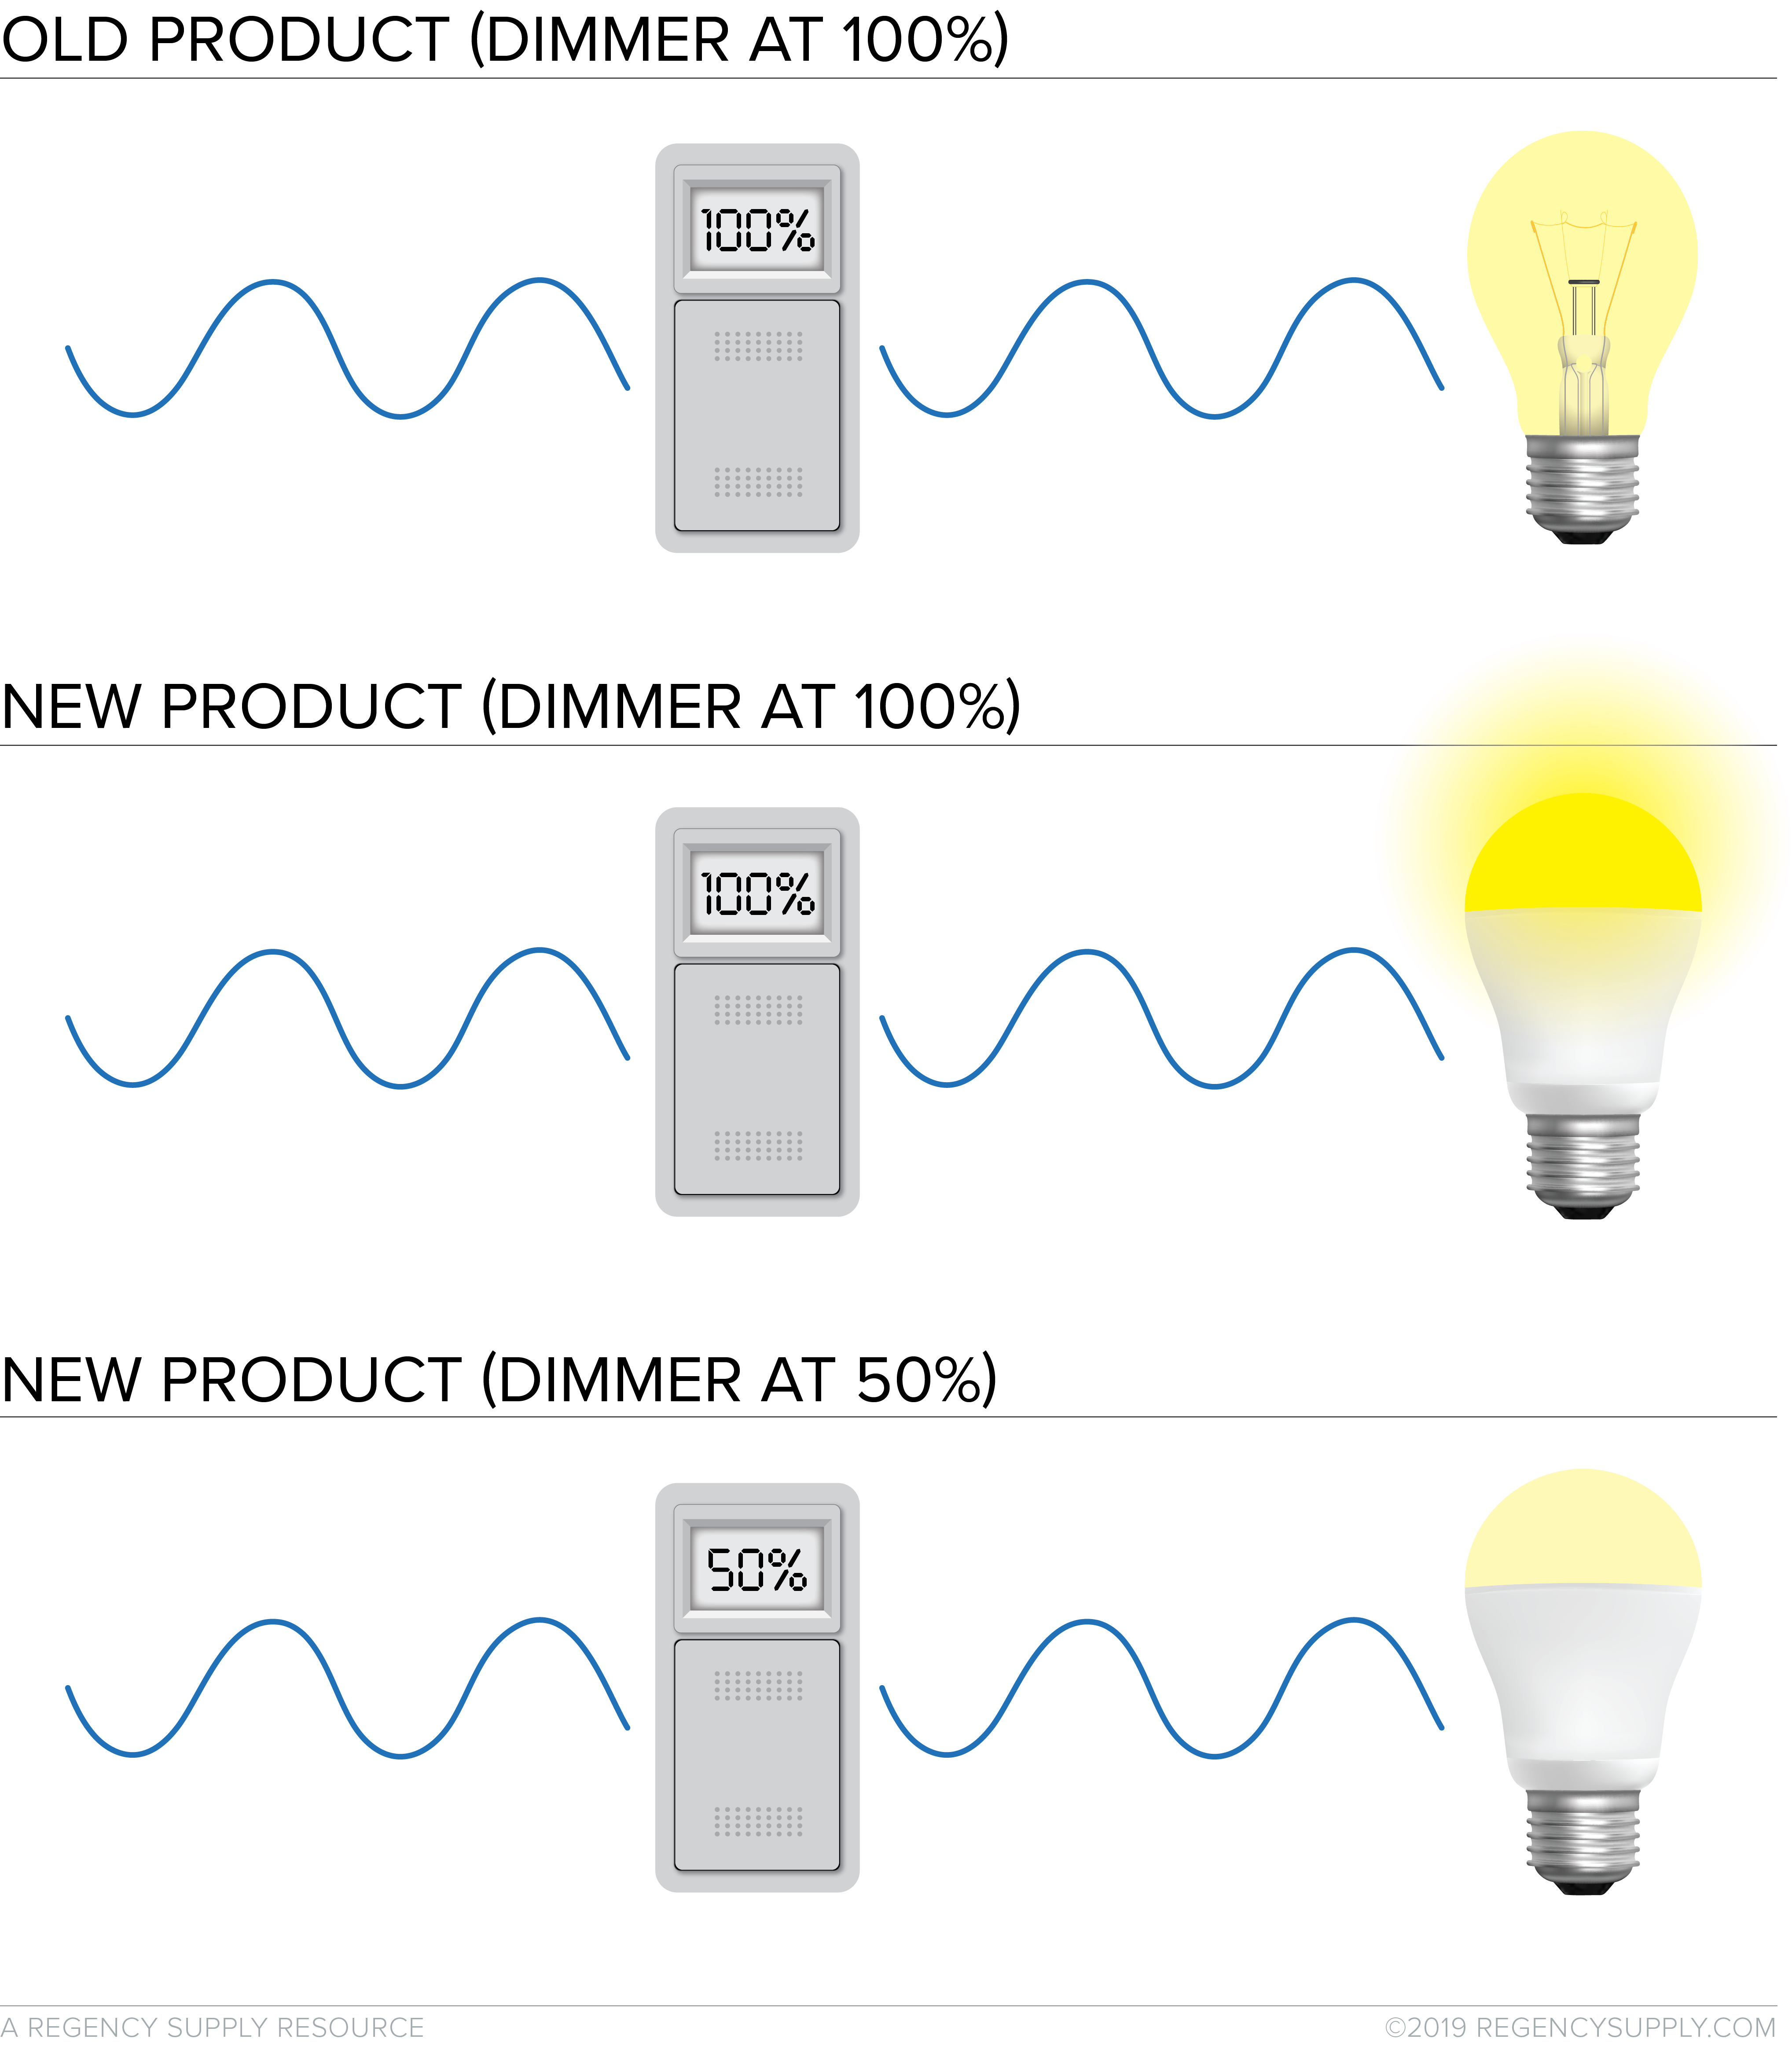 Here's overview of common LED dimming issues and how them